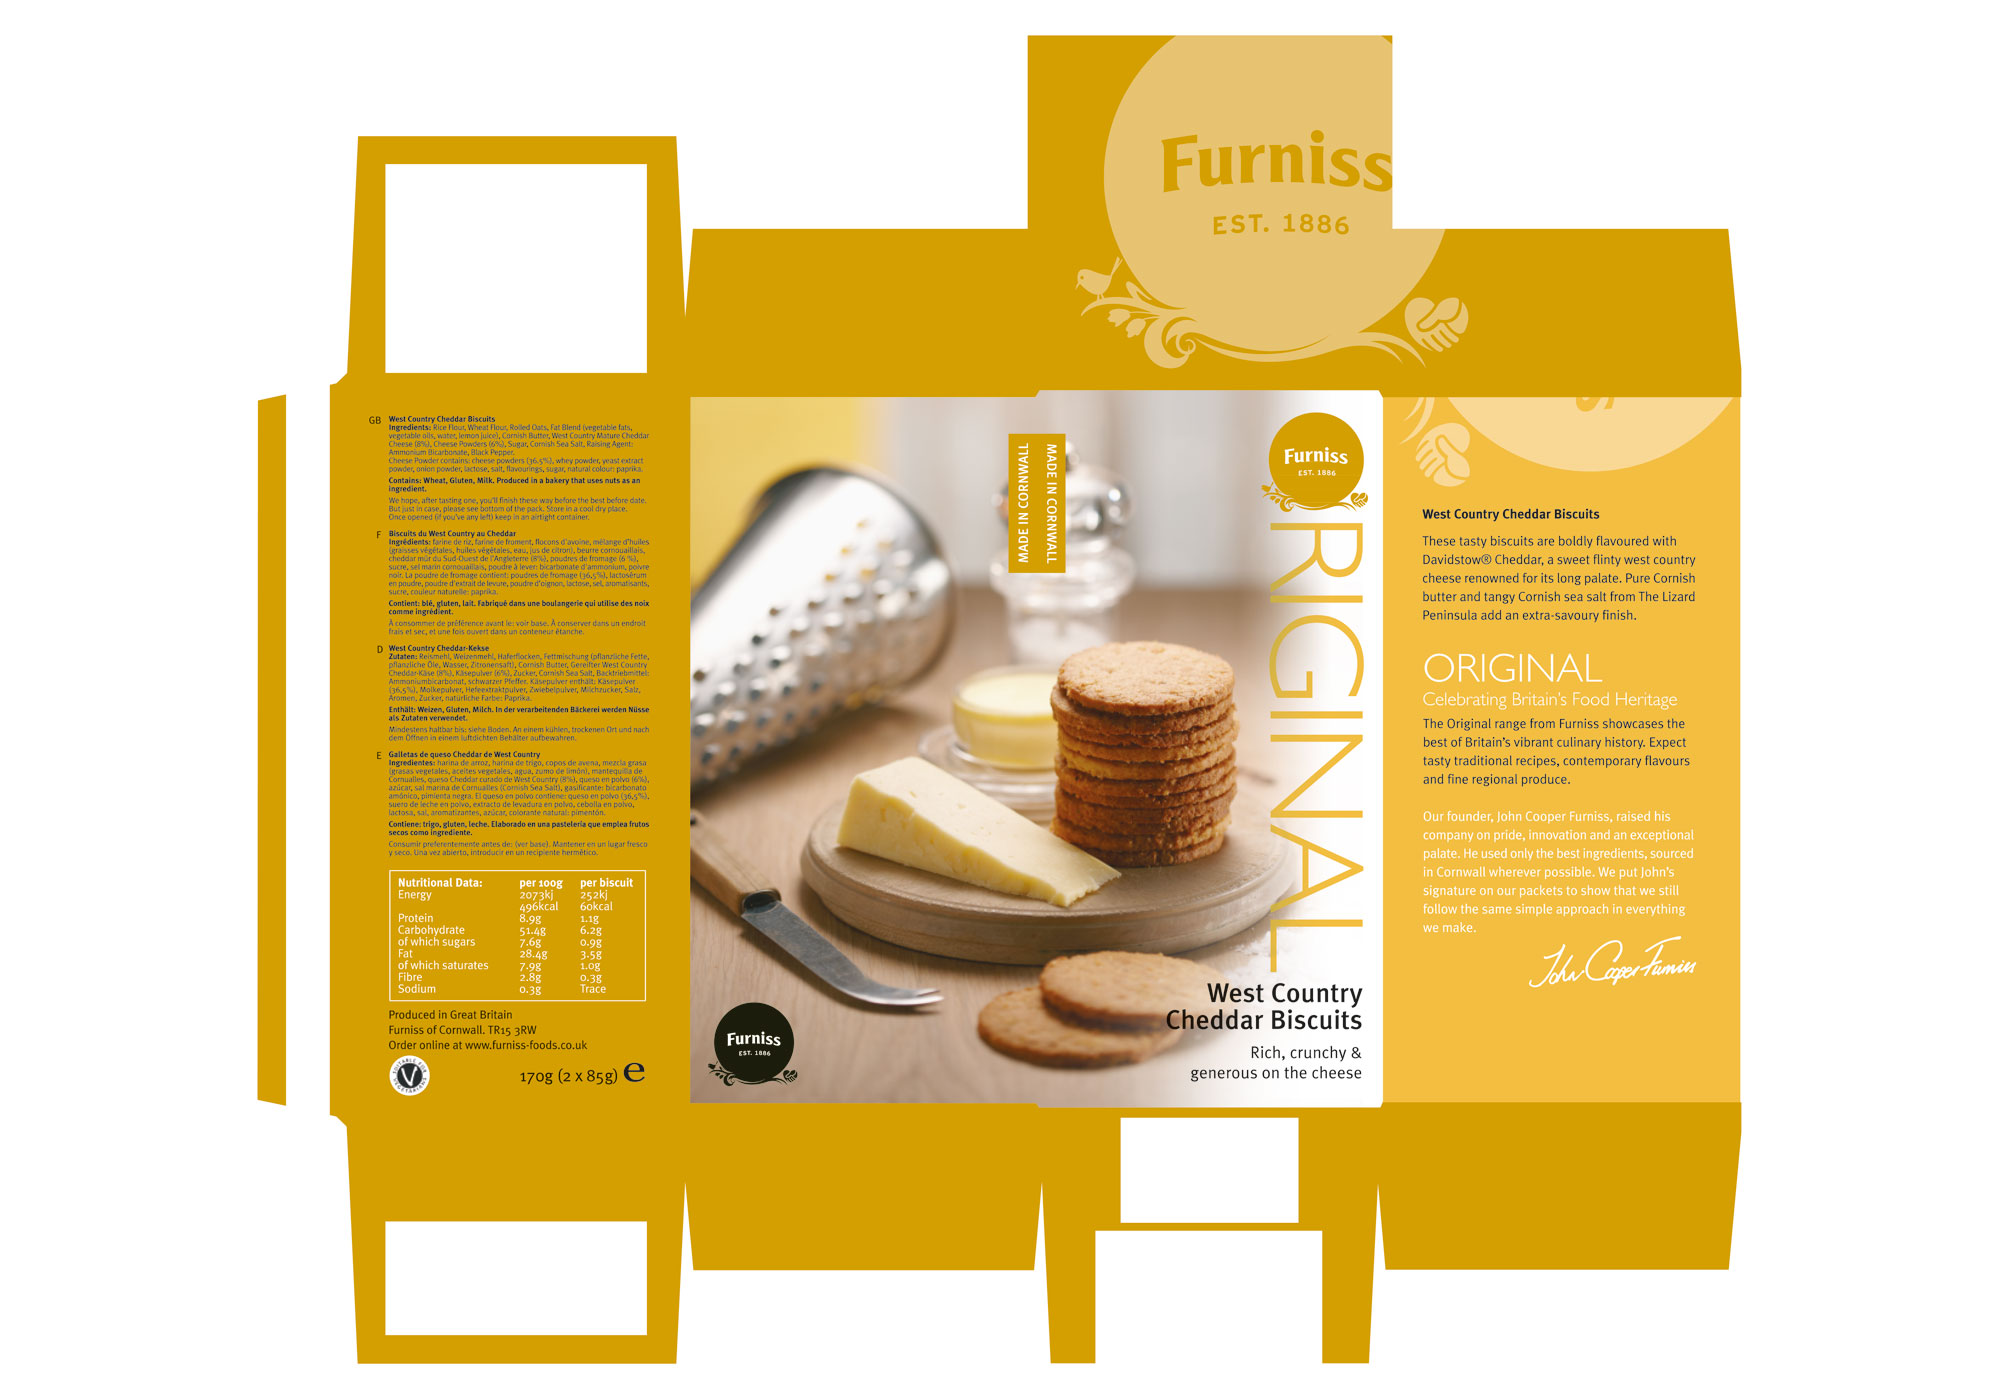 voice-group-web-client-work-2017-S1-furniss-packaging-04.jpg